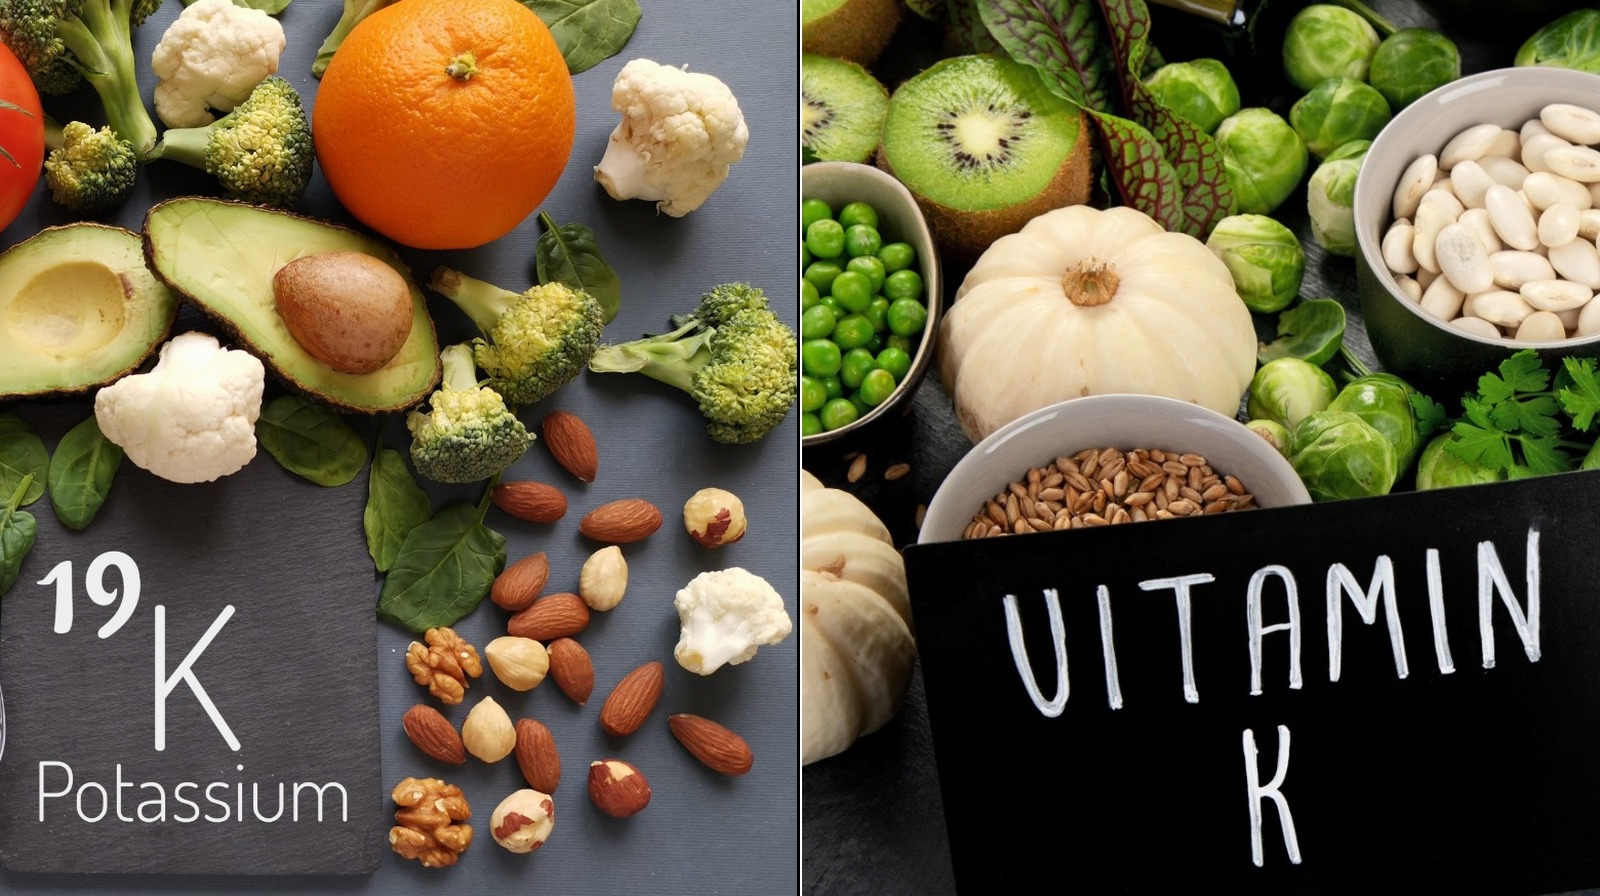 Are Vitamin K And Potassium The Same Thing?